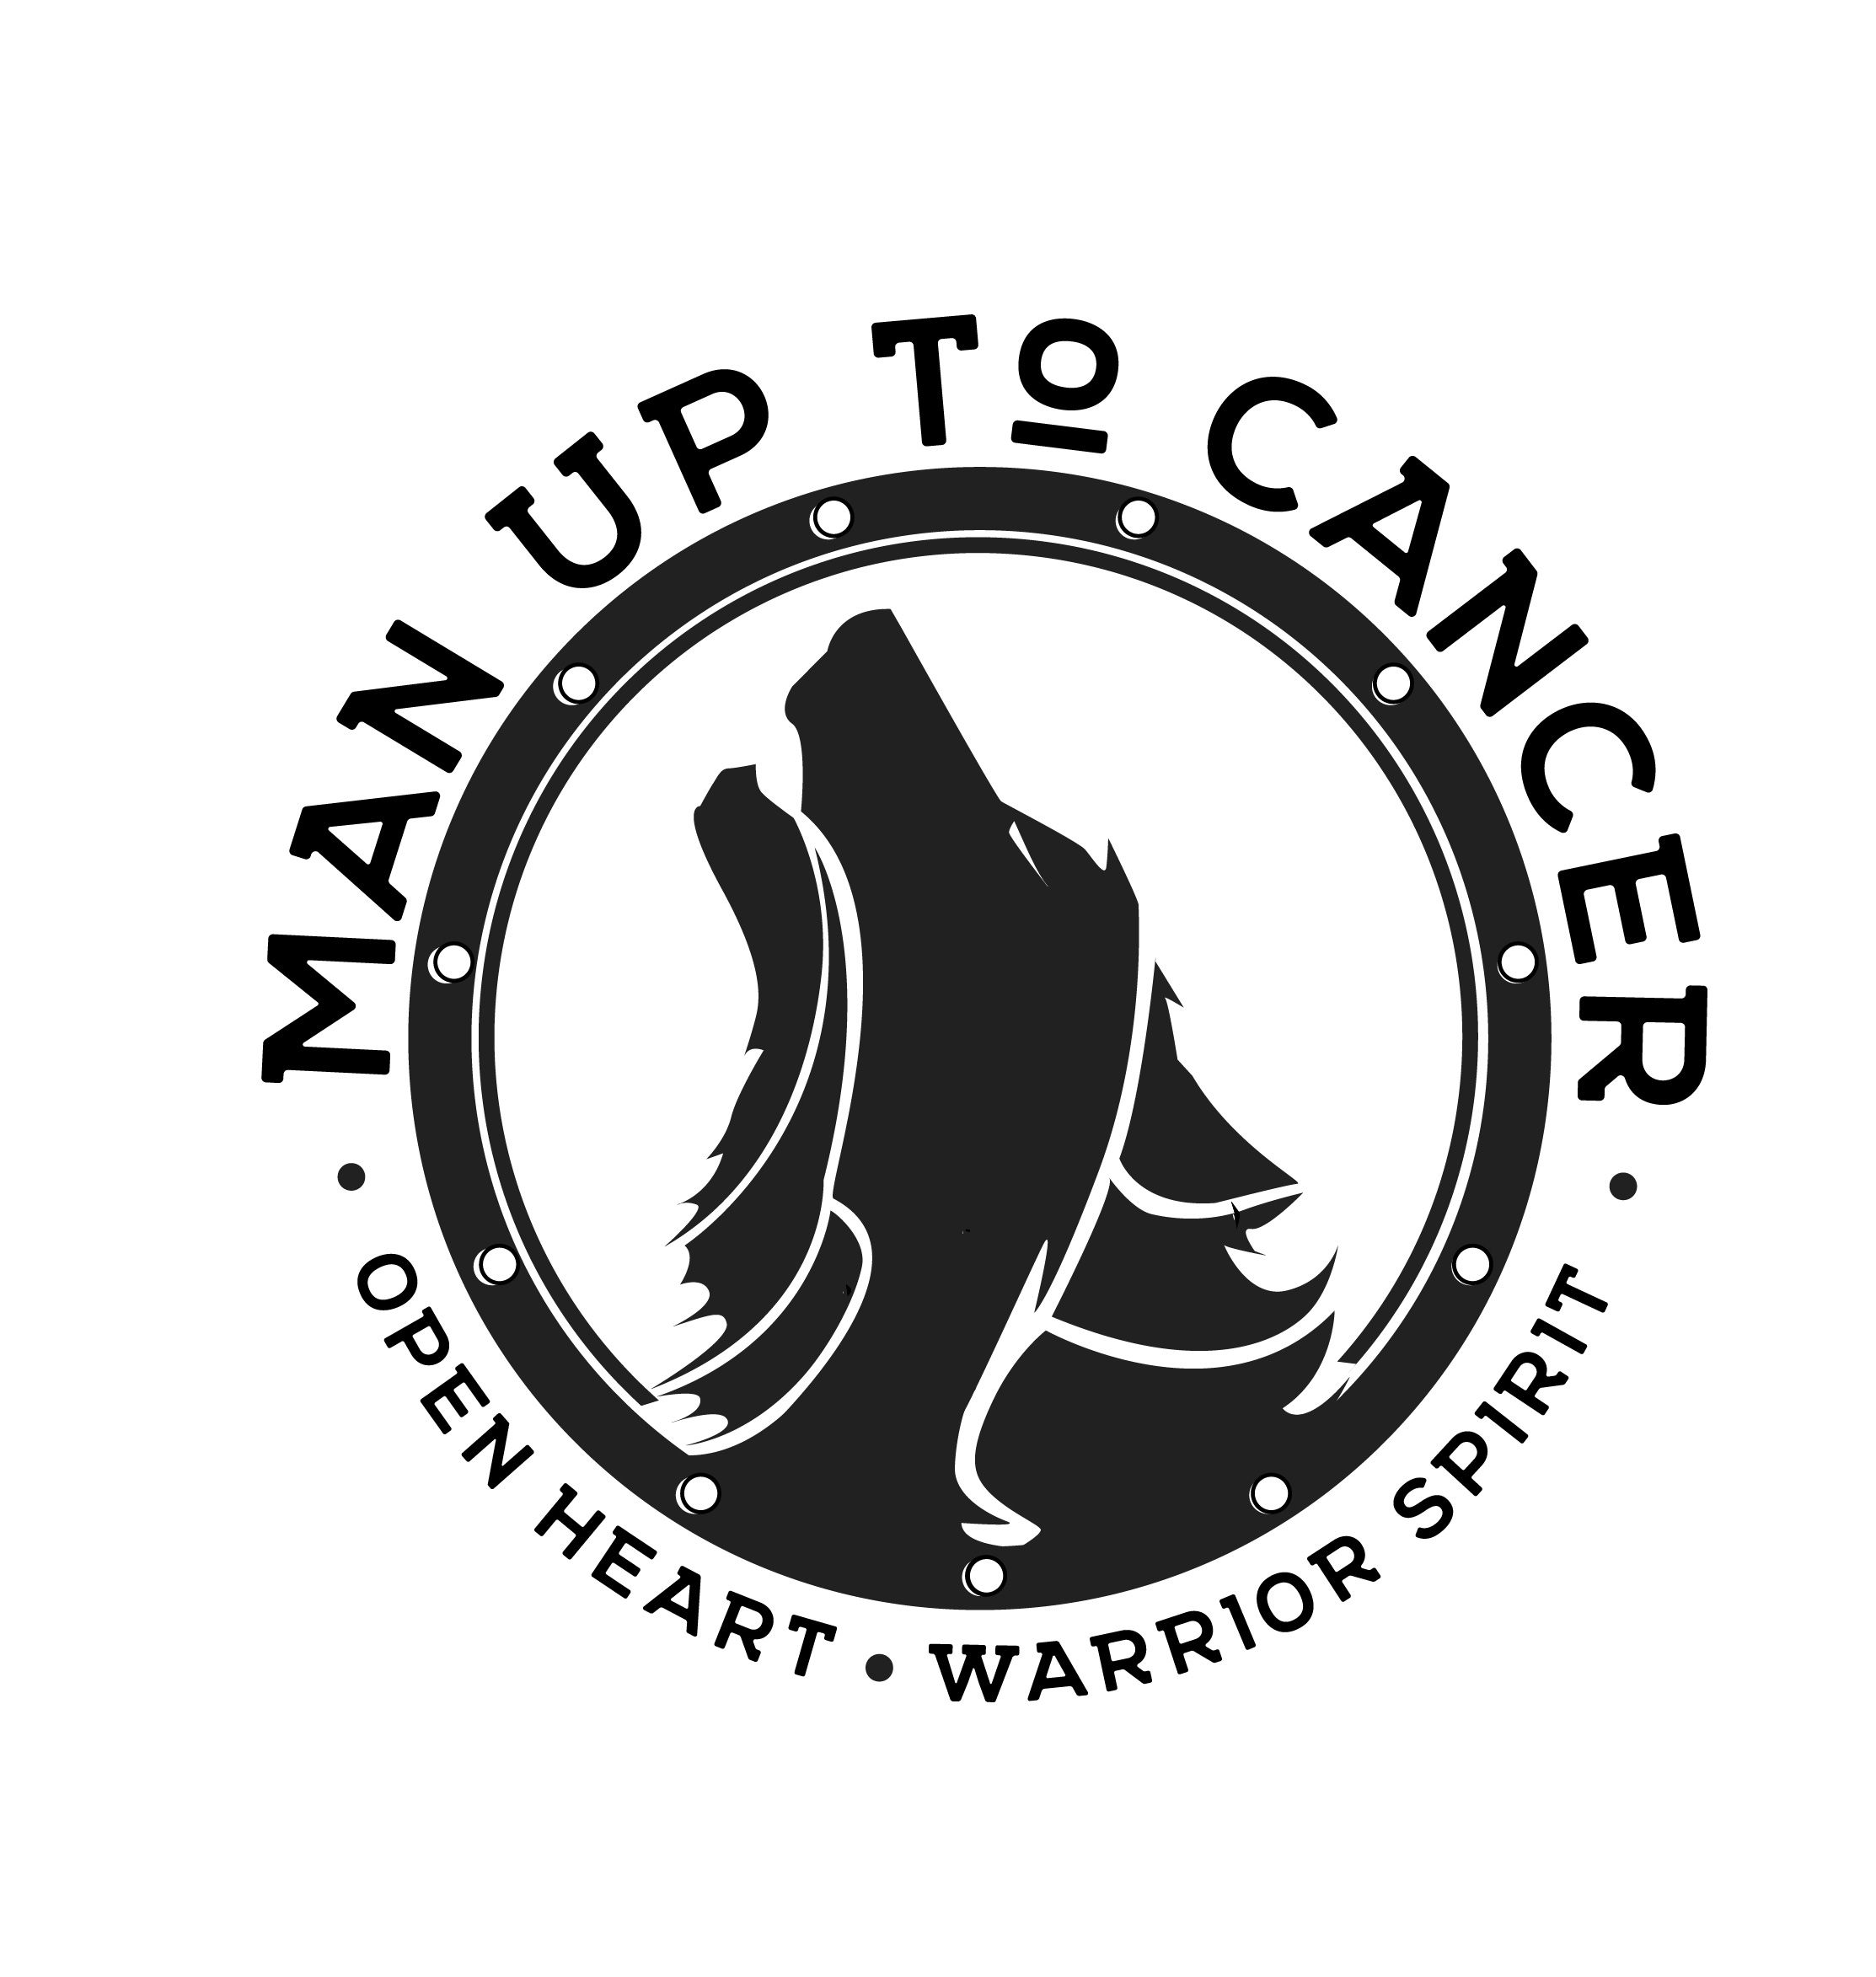 Man Up to Cancer